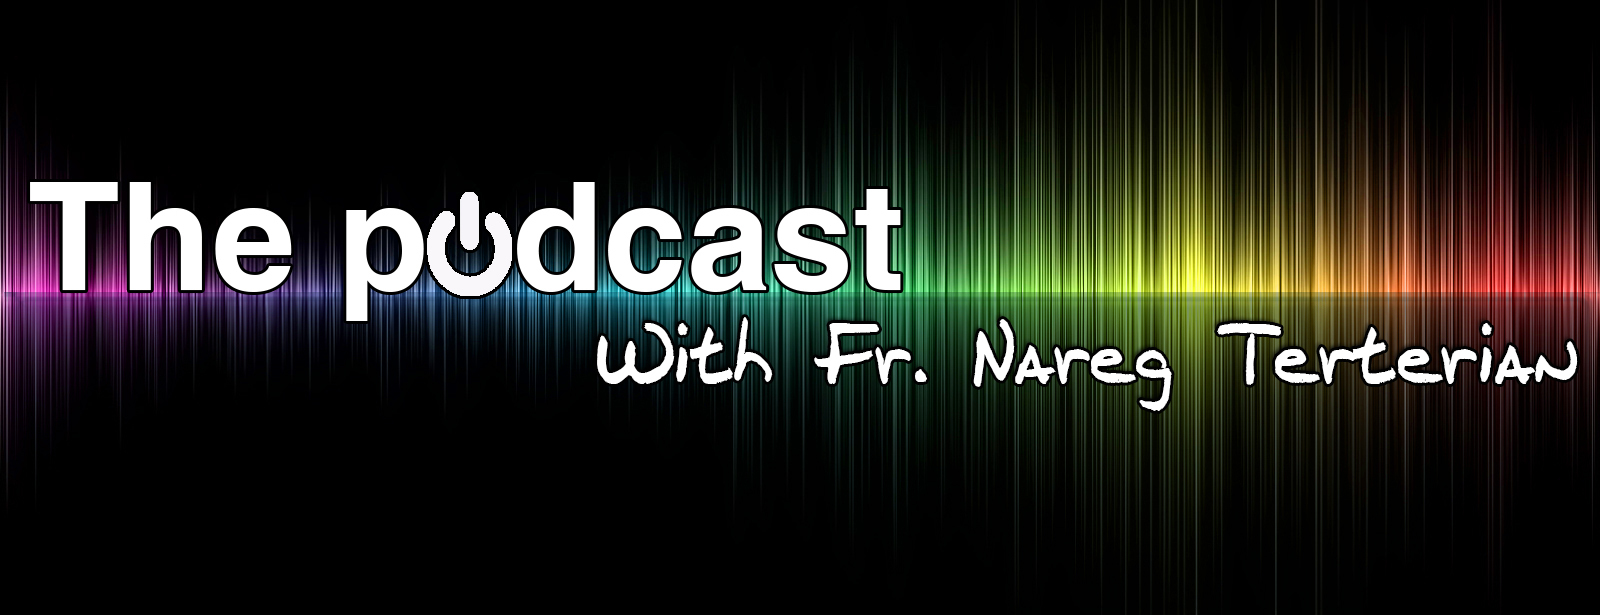 The Podcast With Fr. Nareg header image 1